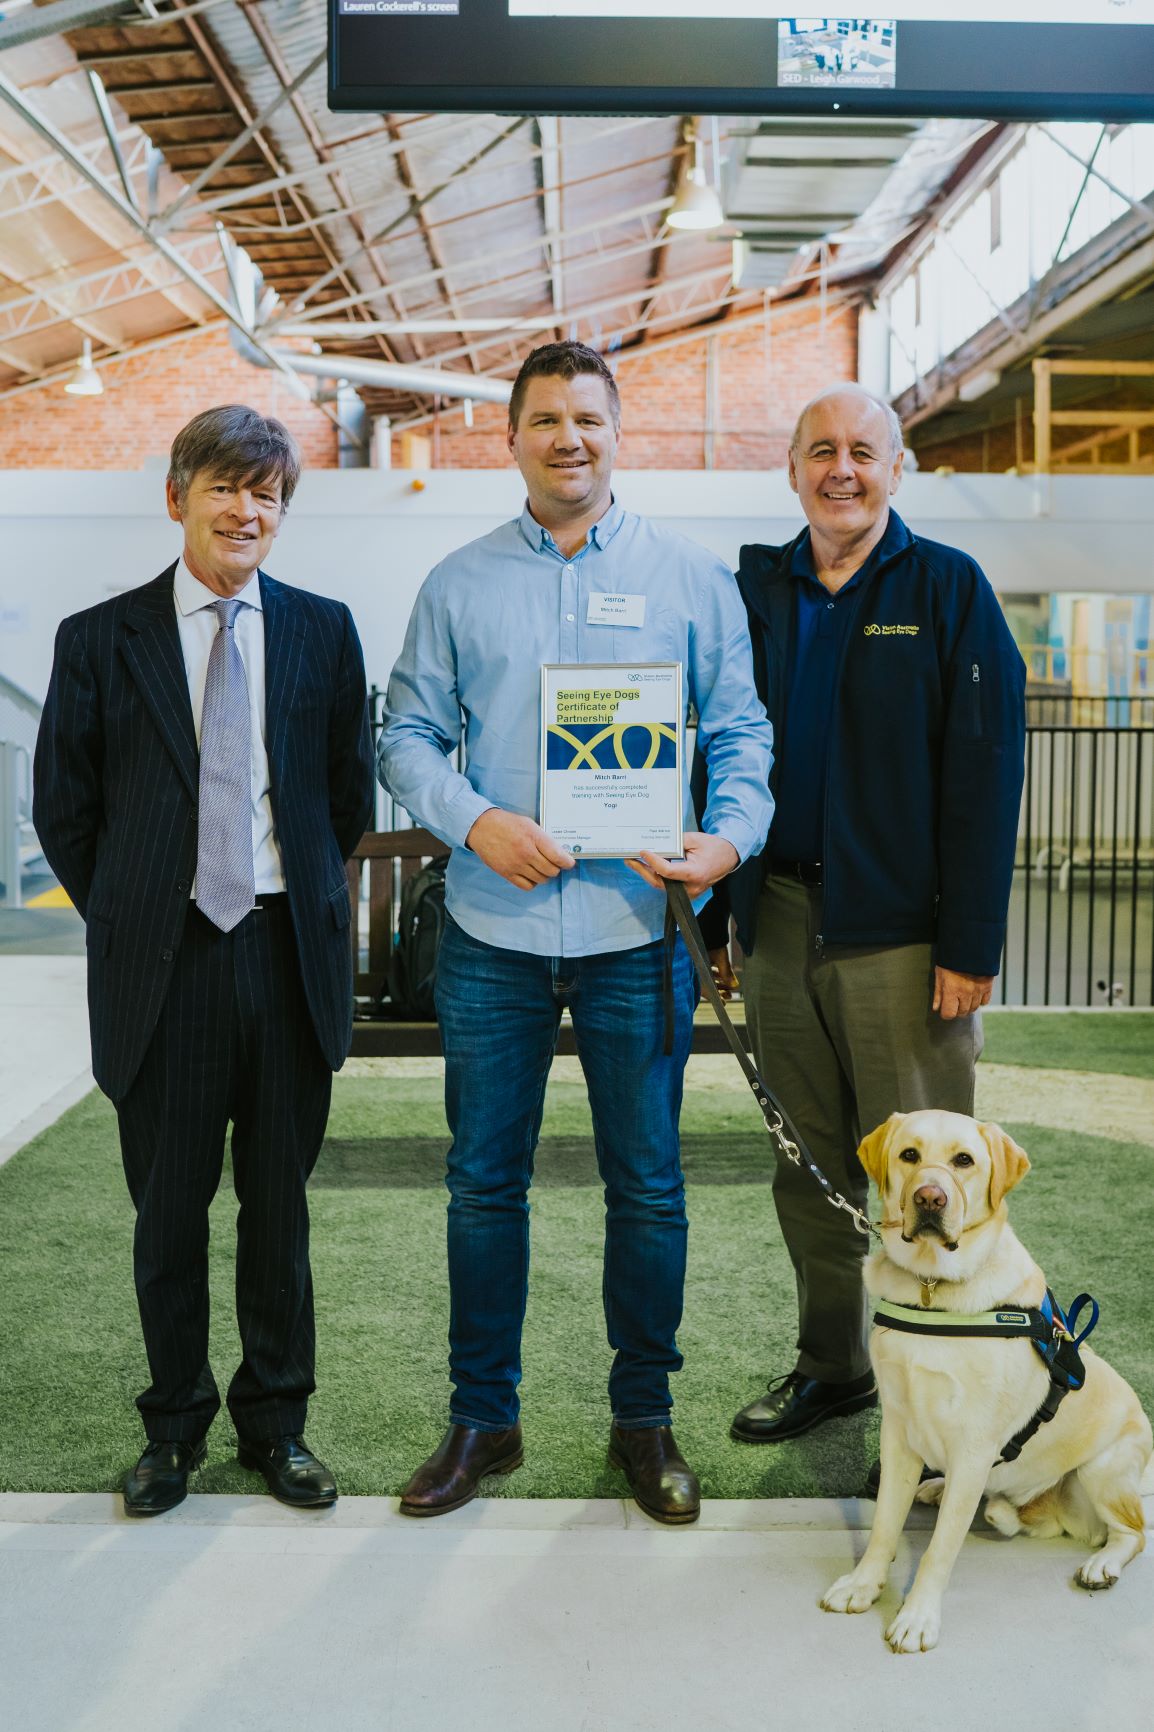 L TO R: The Hon. Luke Donnellan, Minister for Child Protection, Disability, Ageing and Carers, Mitch holding his certificate, Vision Australia CEO Ron Hooton, SED Yogi